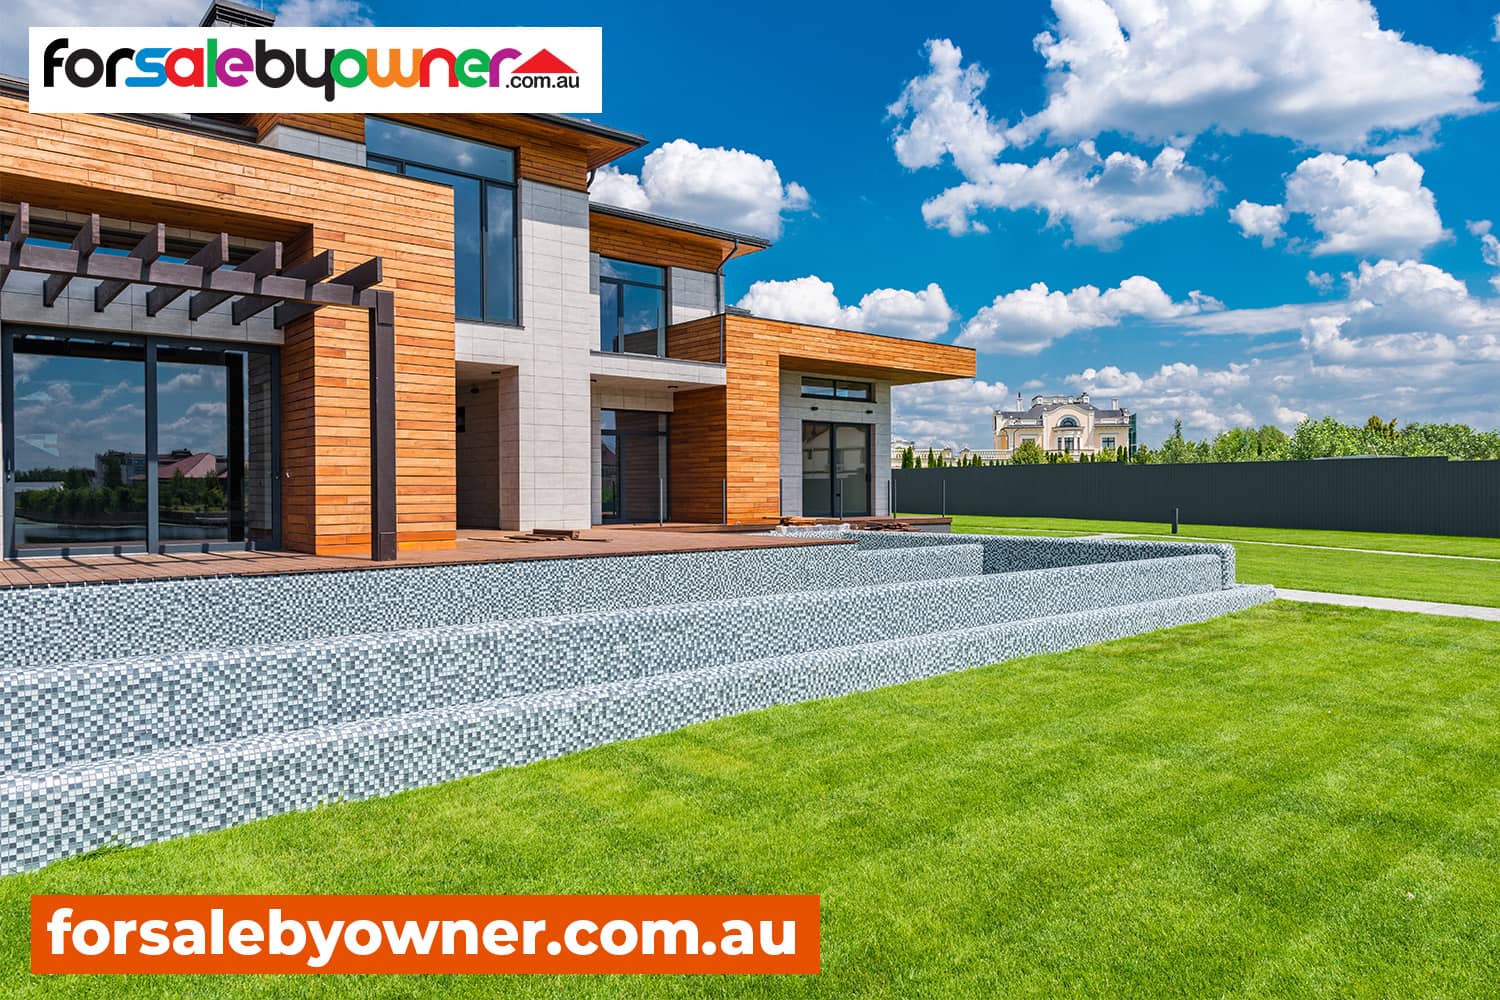 Sell My Property Privately Queensland